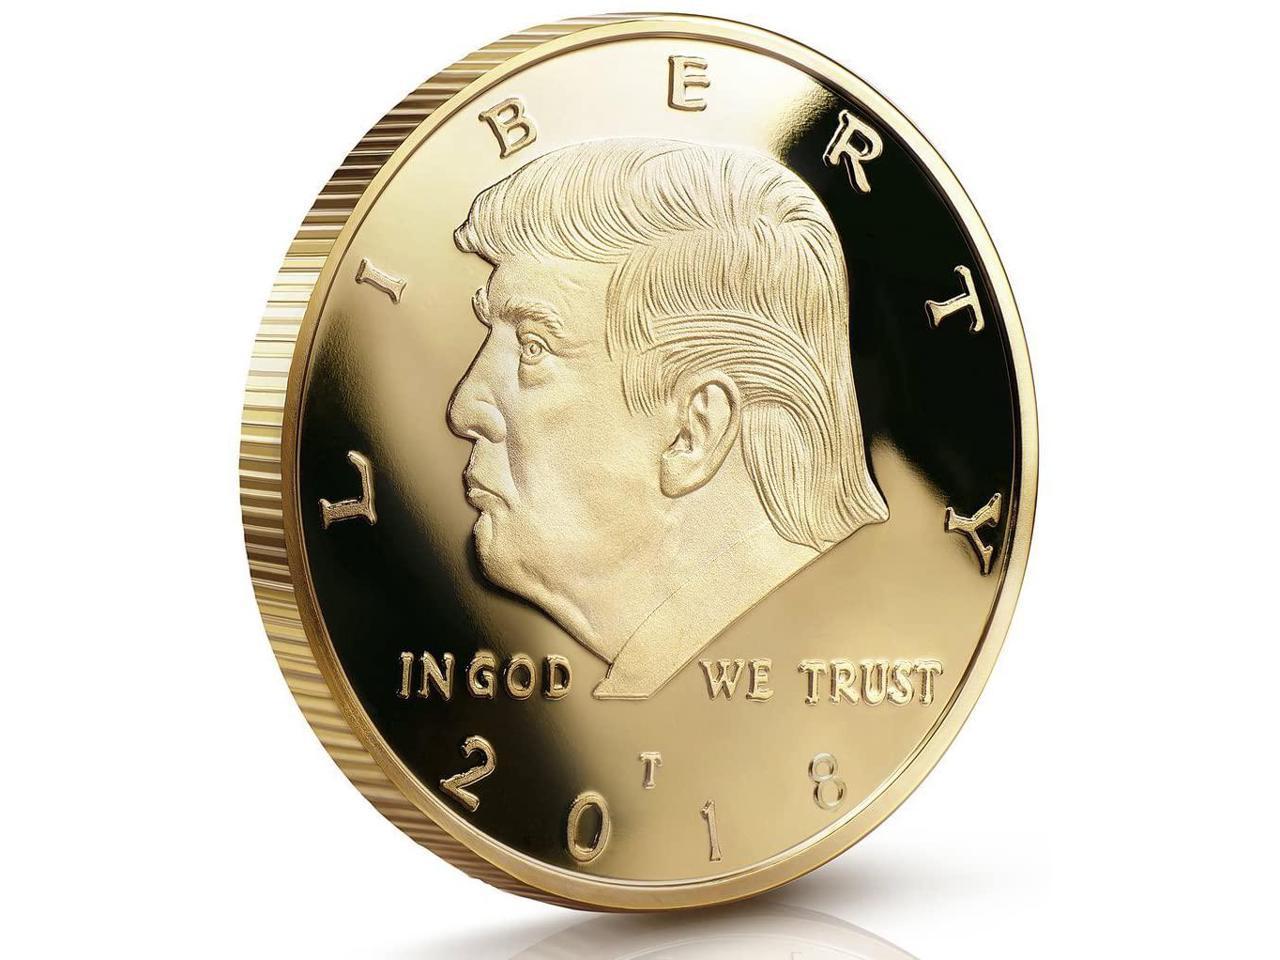 1Pc Donald Trump Coin Inauguration Collectibles U.S 45th President Challenge US 